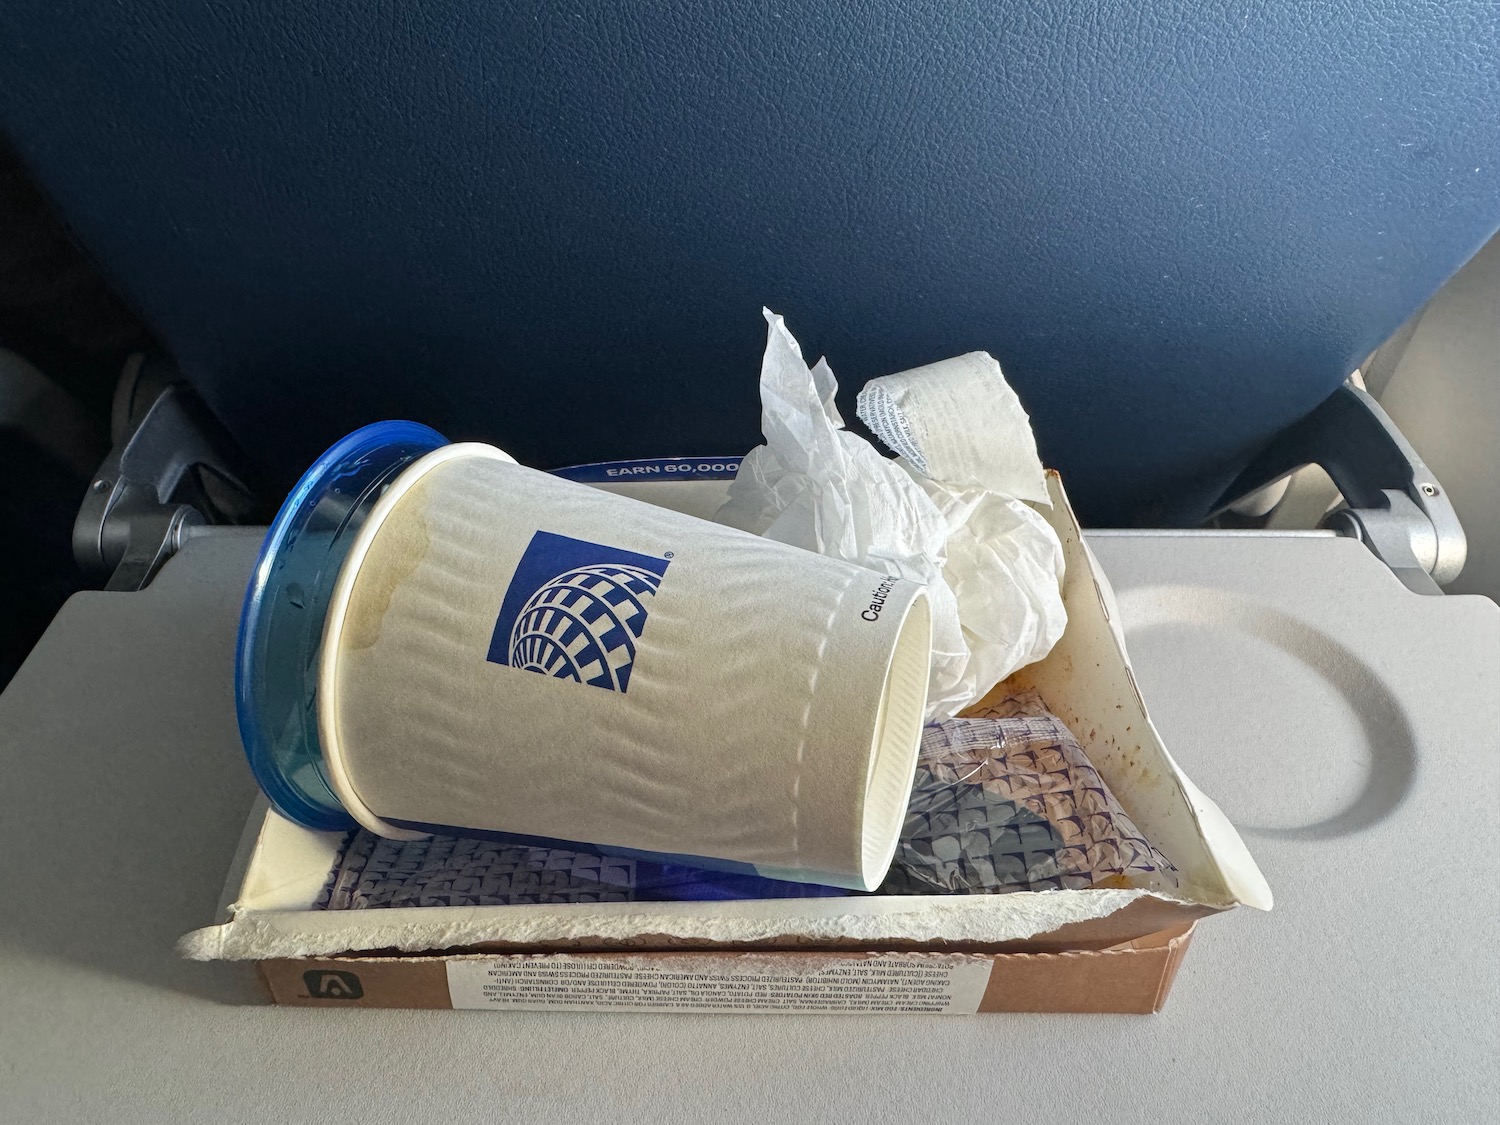 a cup and napkin in a box